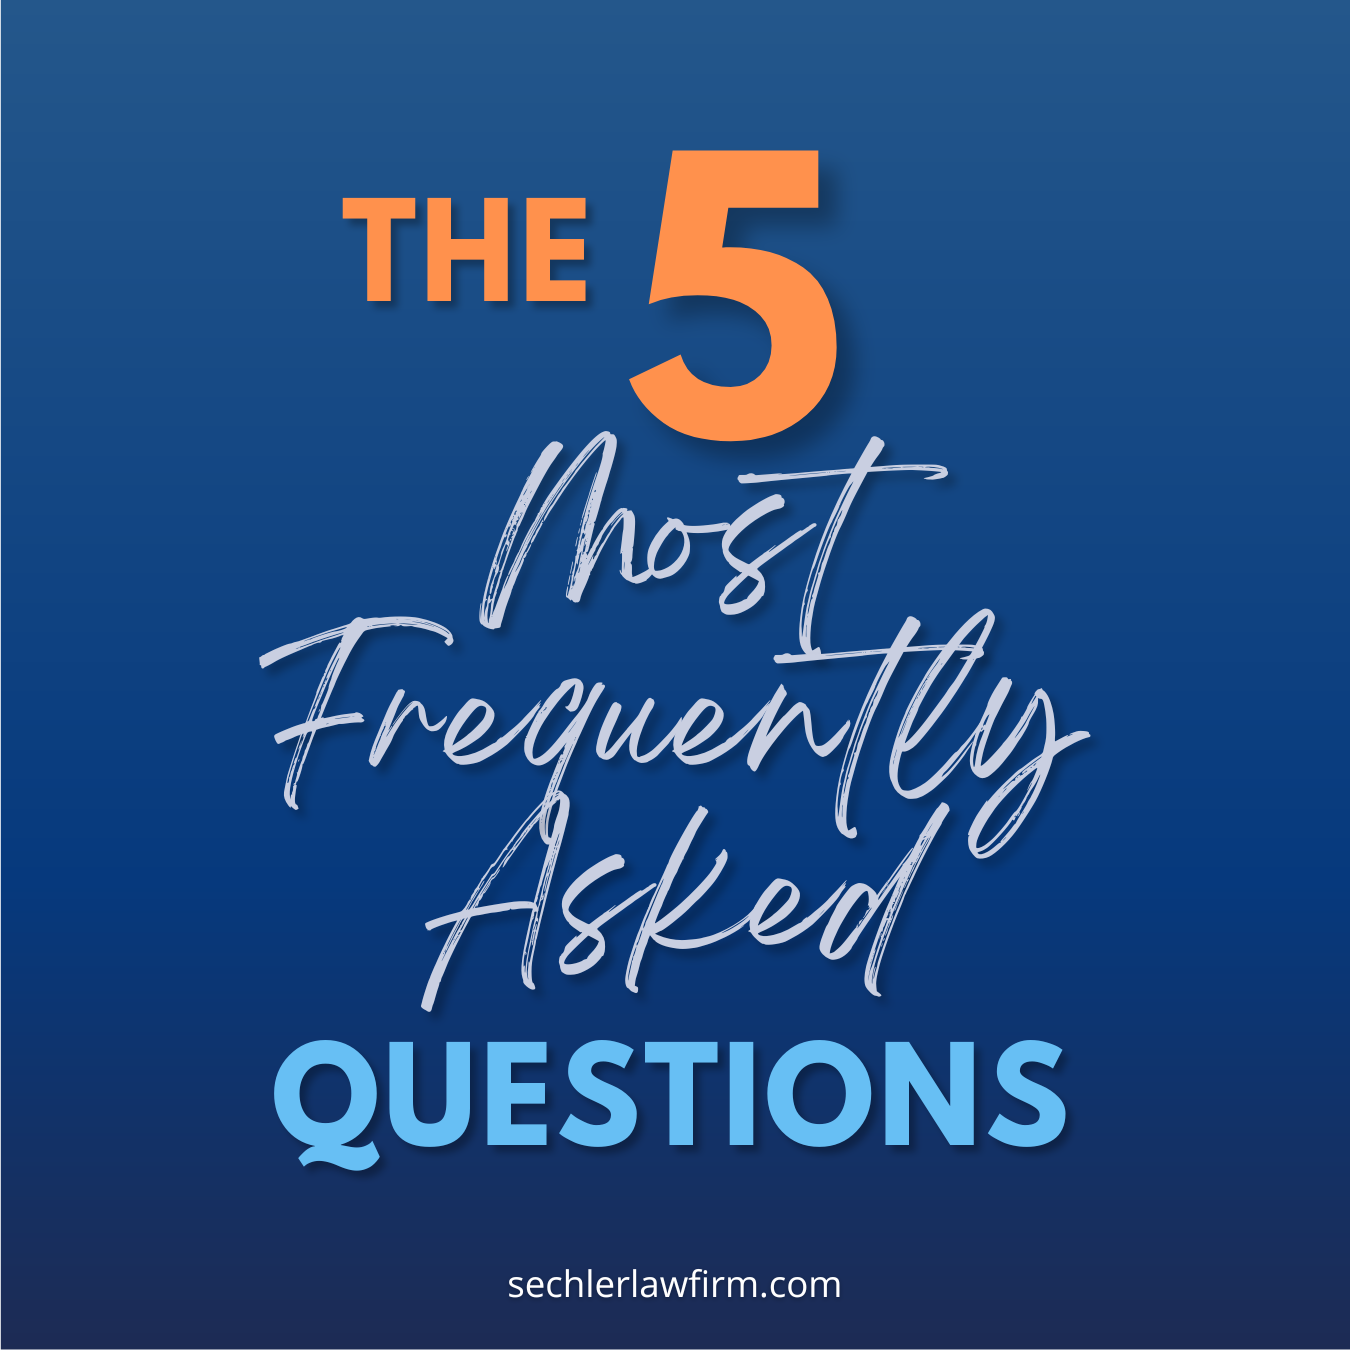 The Five Questions We Are Frequently Asked